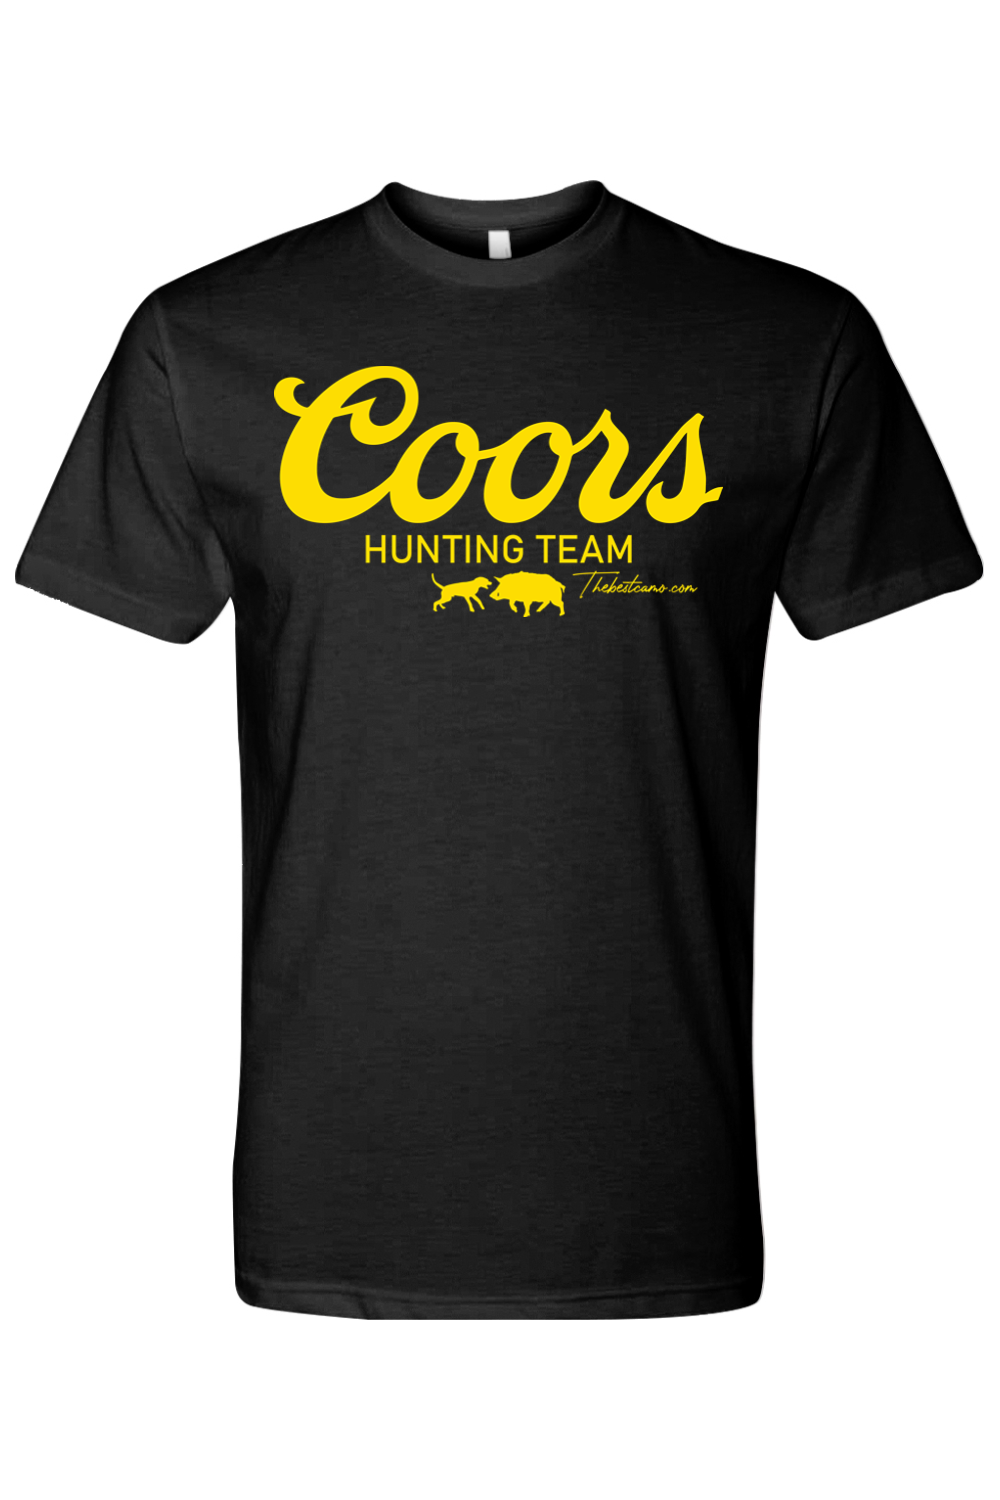 coors hunting team